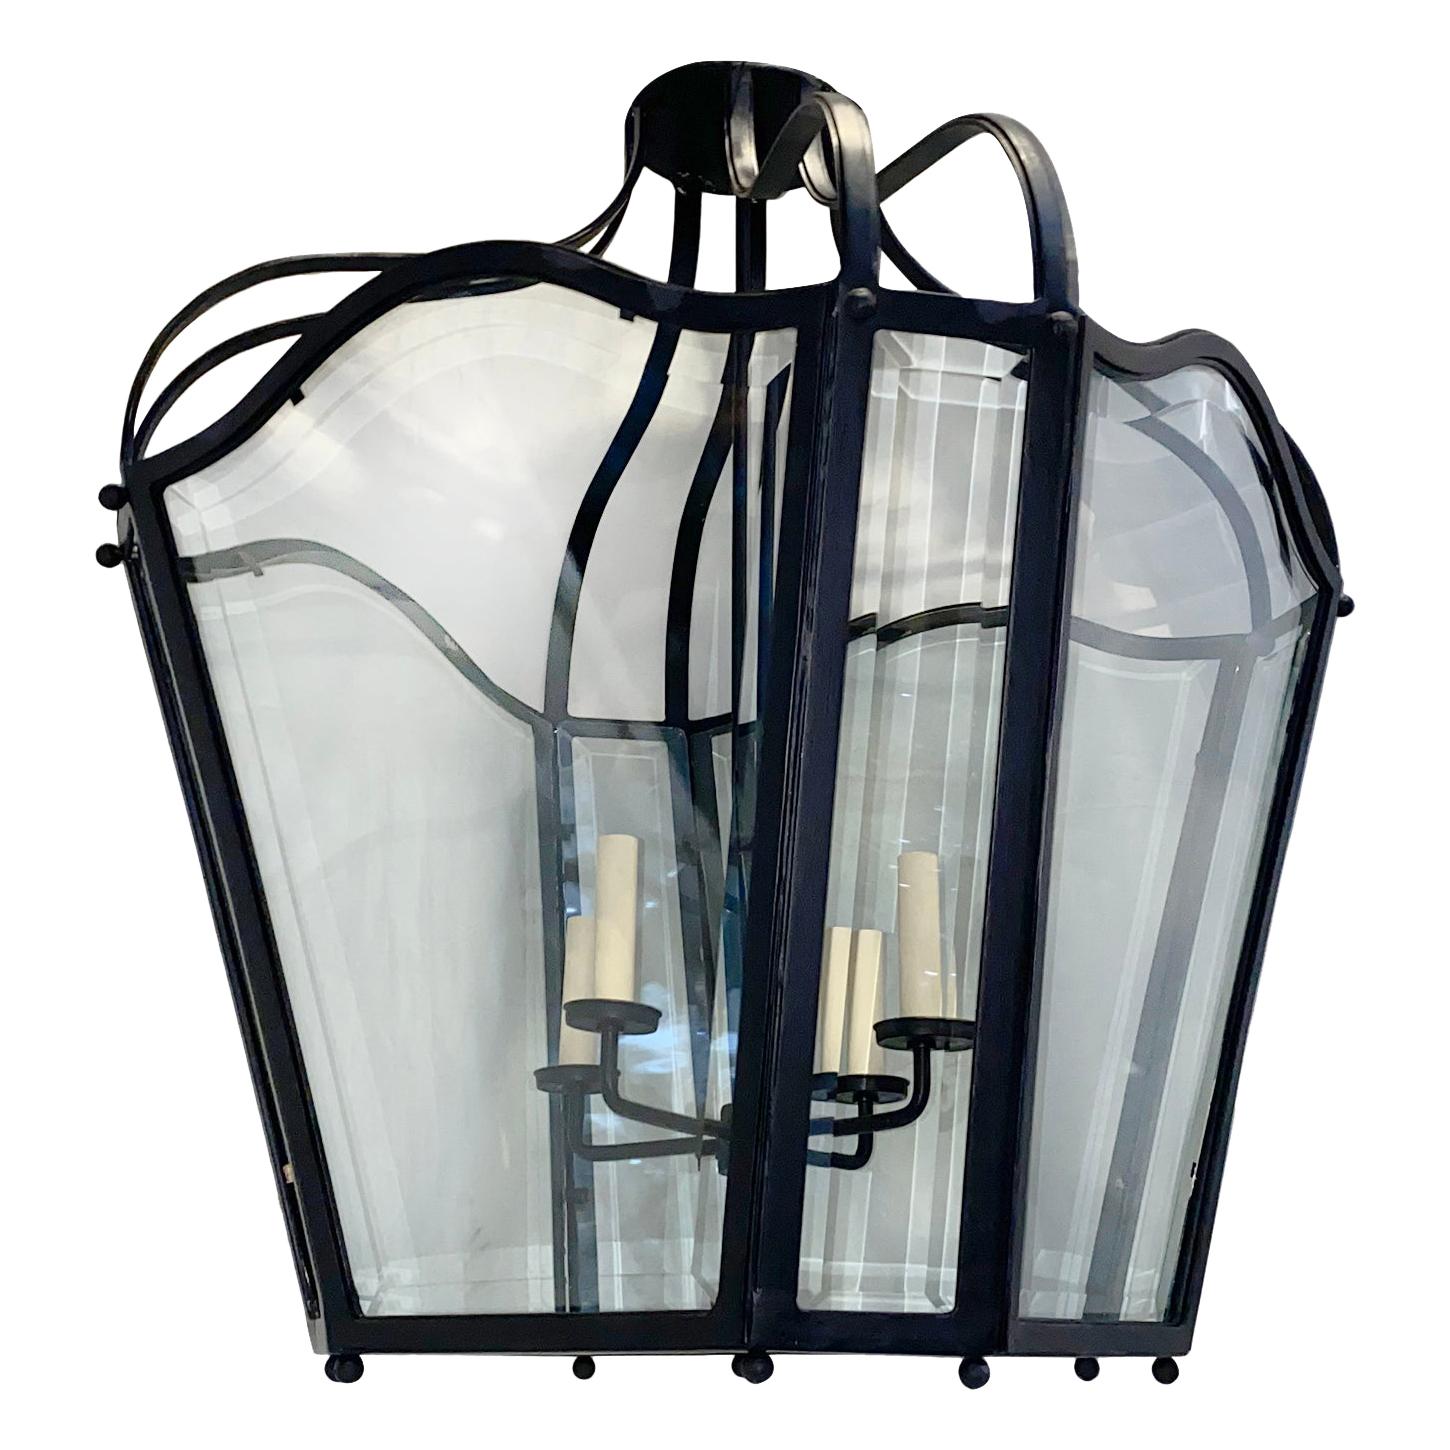 Pair of French Wrought Iron Lanterns, Sold Individually